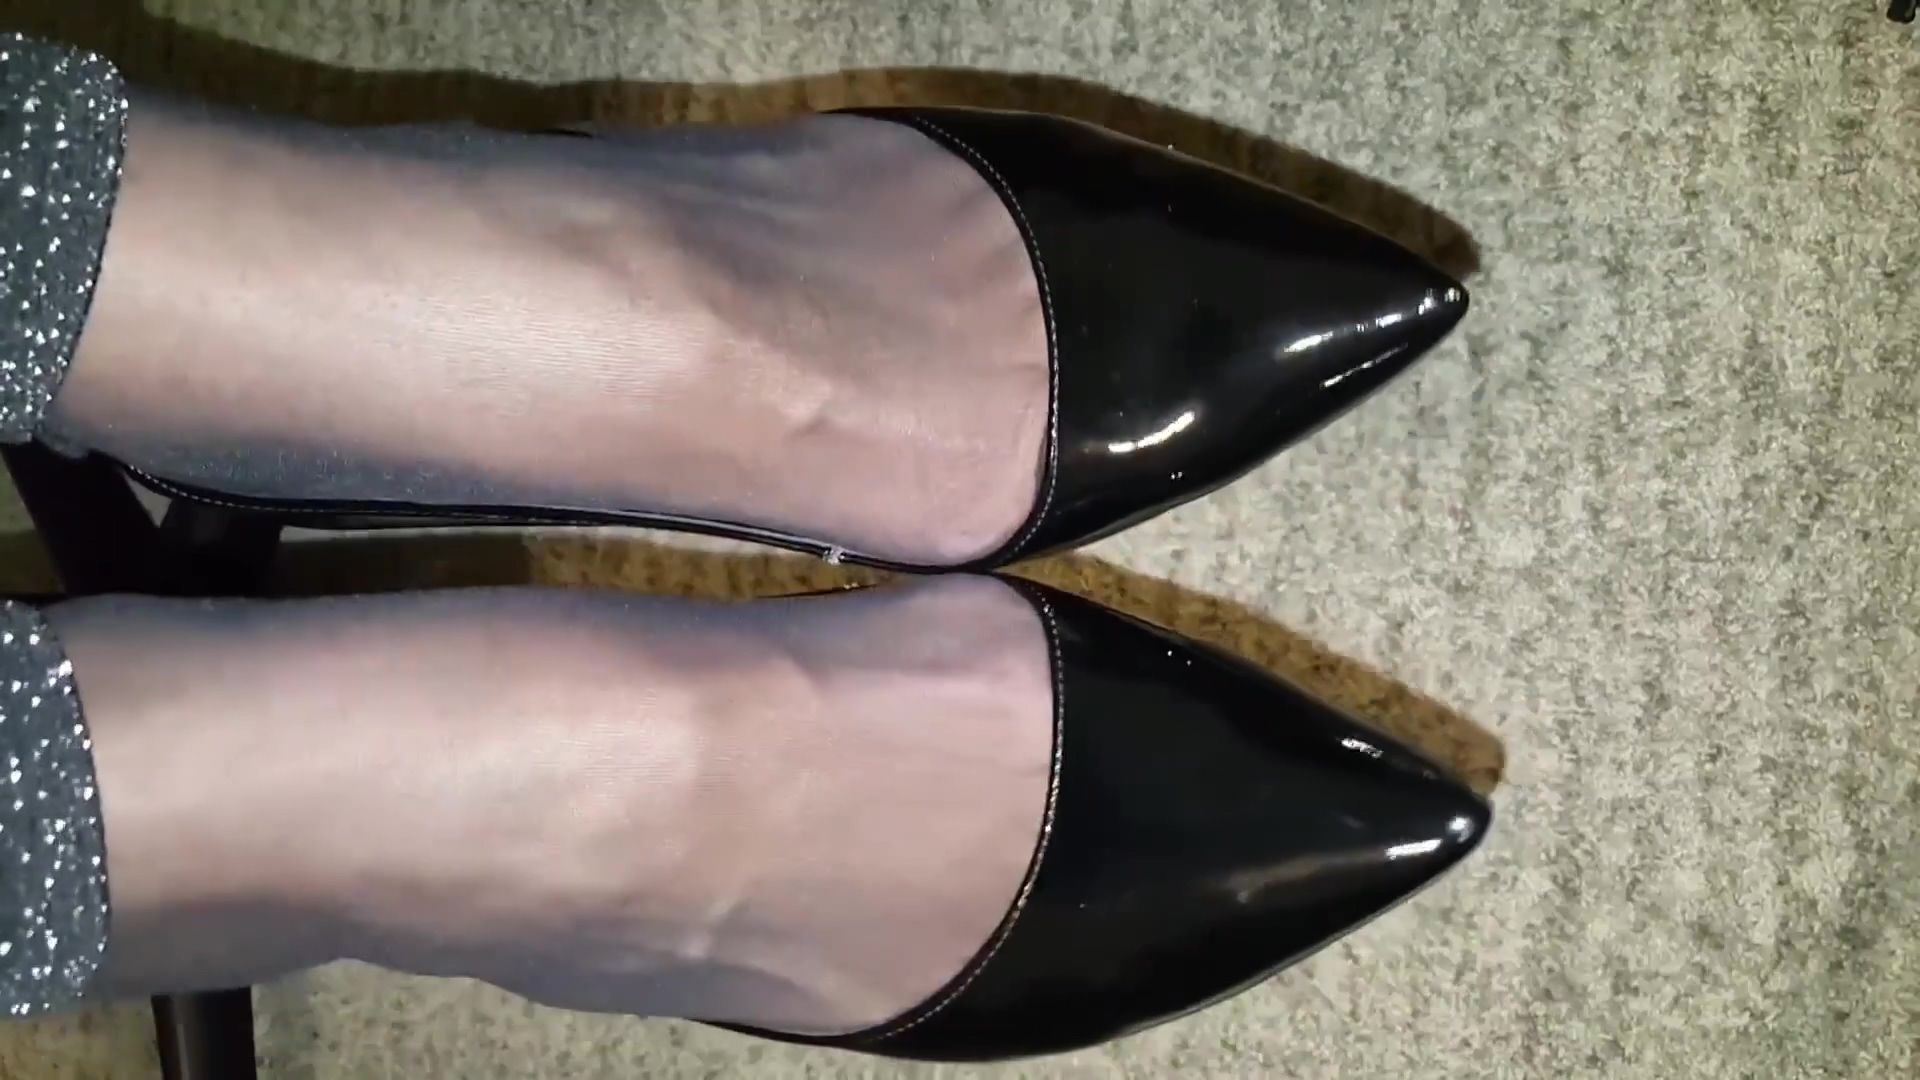 Amateur How Do My Sexy Feet And Toes Look In My New Shiny Pantyhose? Vip-File